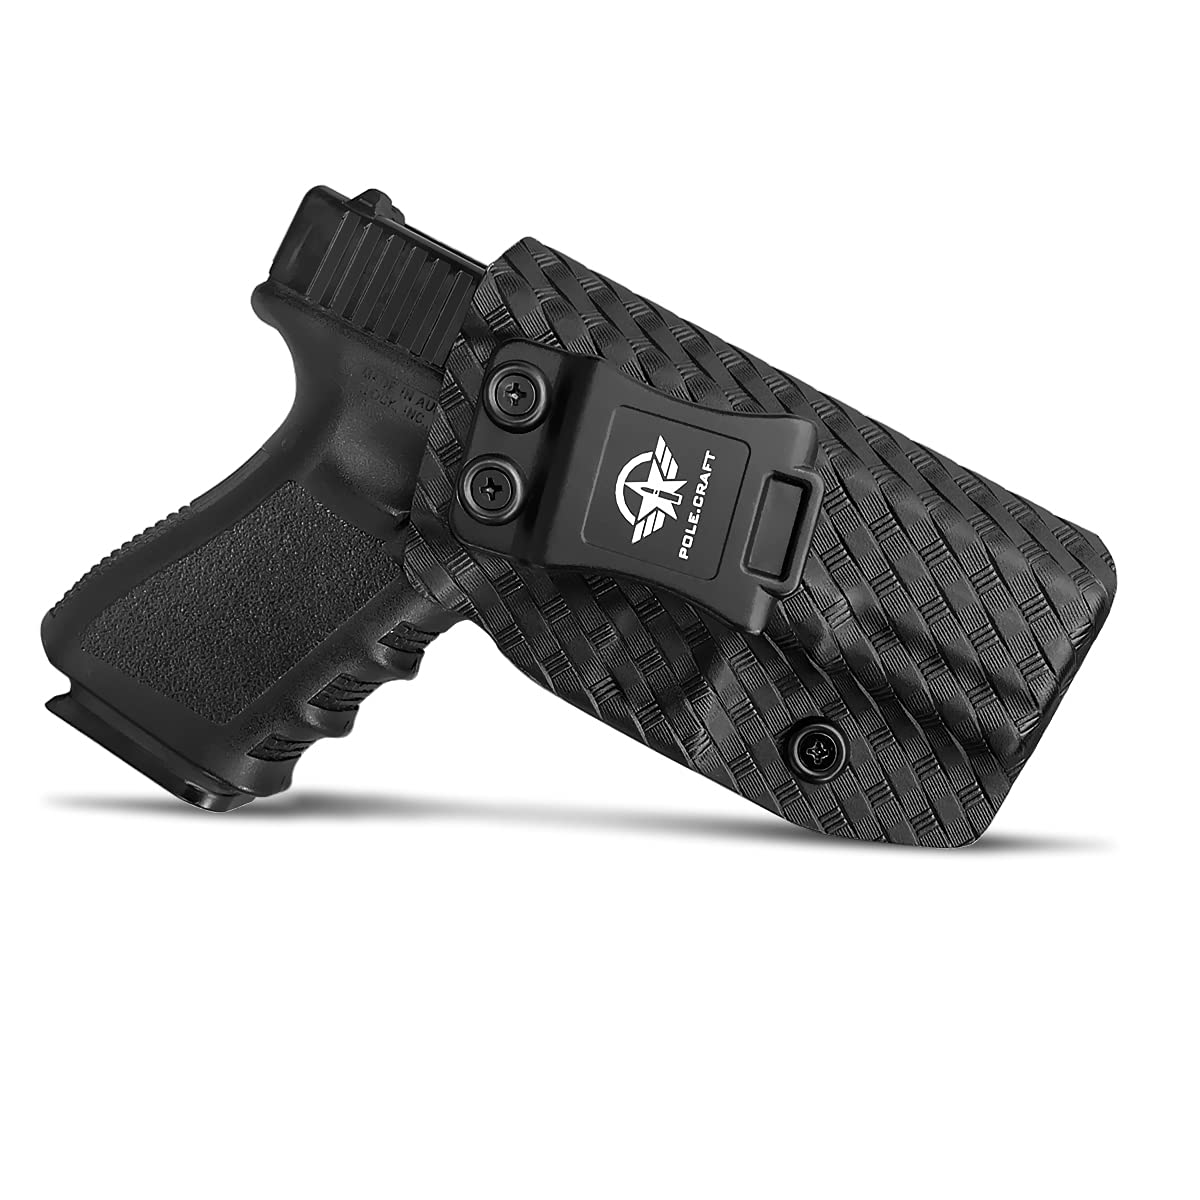  Level II/III Duty Holster Compatible with Glock  17/19/19x/23/31/32/45(Gen1-5), G22(Gen1-4), Holster for Duty Belt, Not Fit  G22 Gen5,Ride Height Adjustable, Kydex&Polymer Available, Material Optional  : Sports & Outdoors